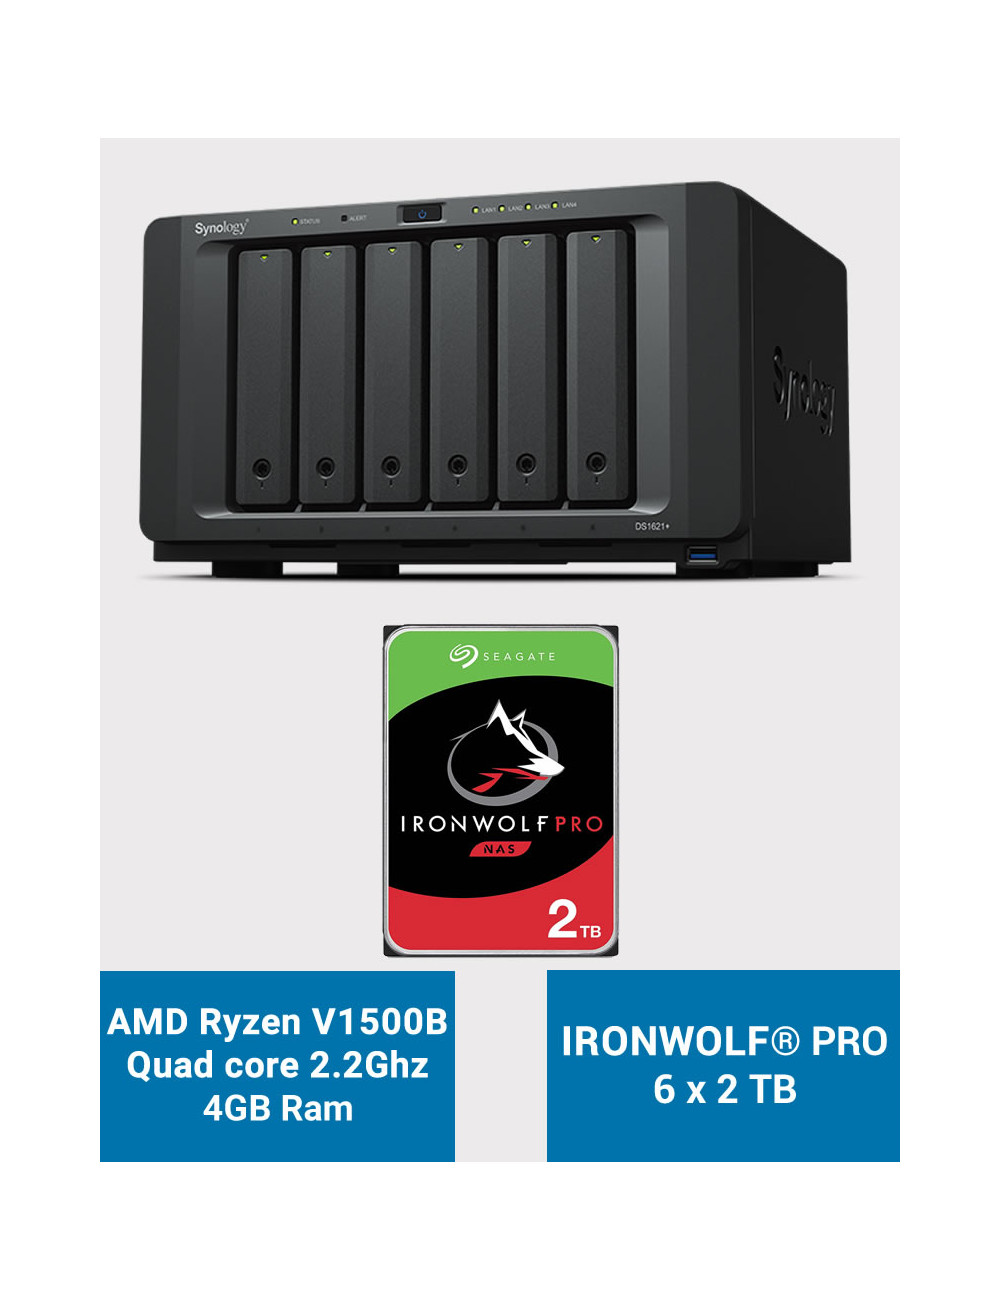 WD RED 3TB SATA drive for NAS